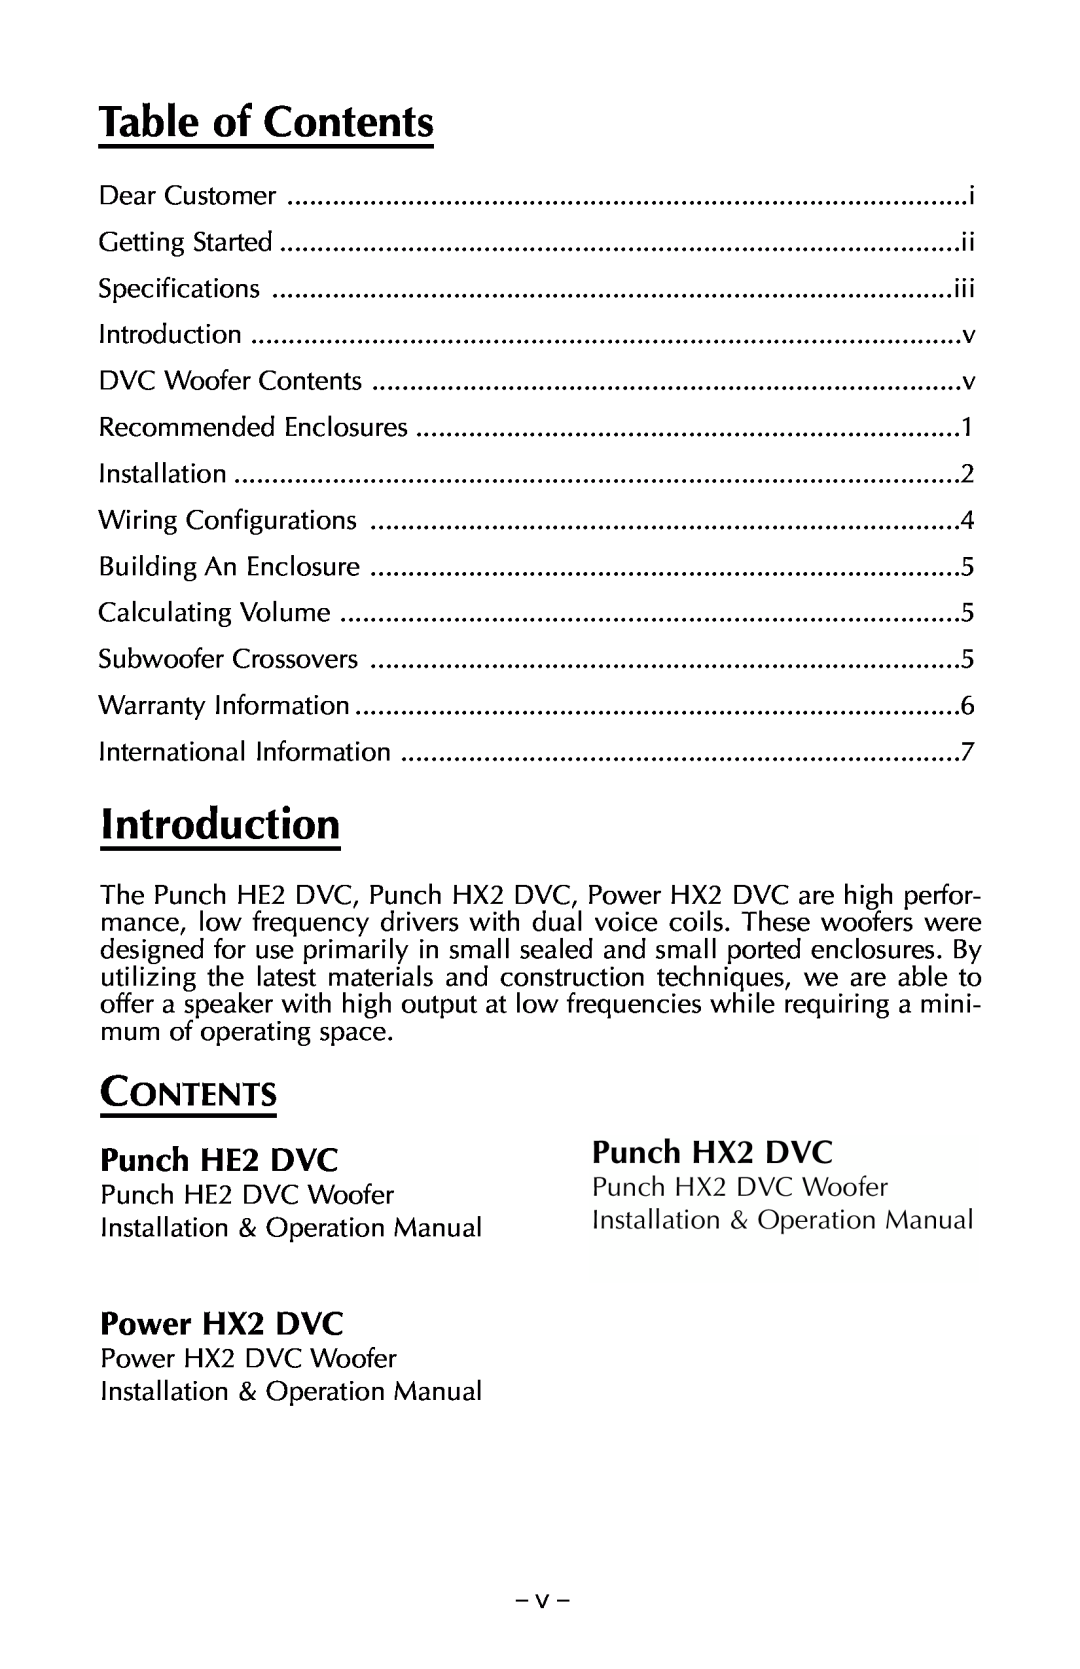 Rockford Fosgate RFP3208, RFD2218 manual Table of Contents, Introduction, Punch HE2 DVC, Punch HX2 DVC, Power HX2 DVC 